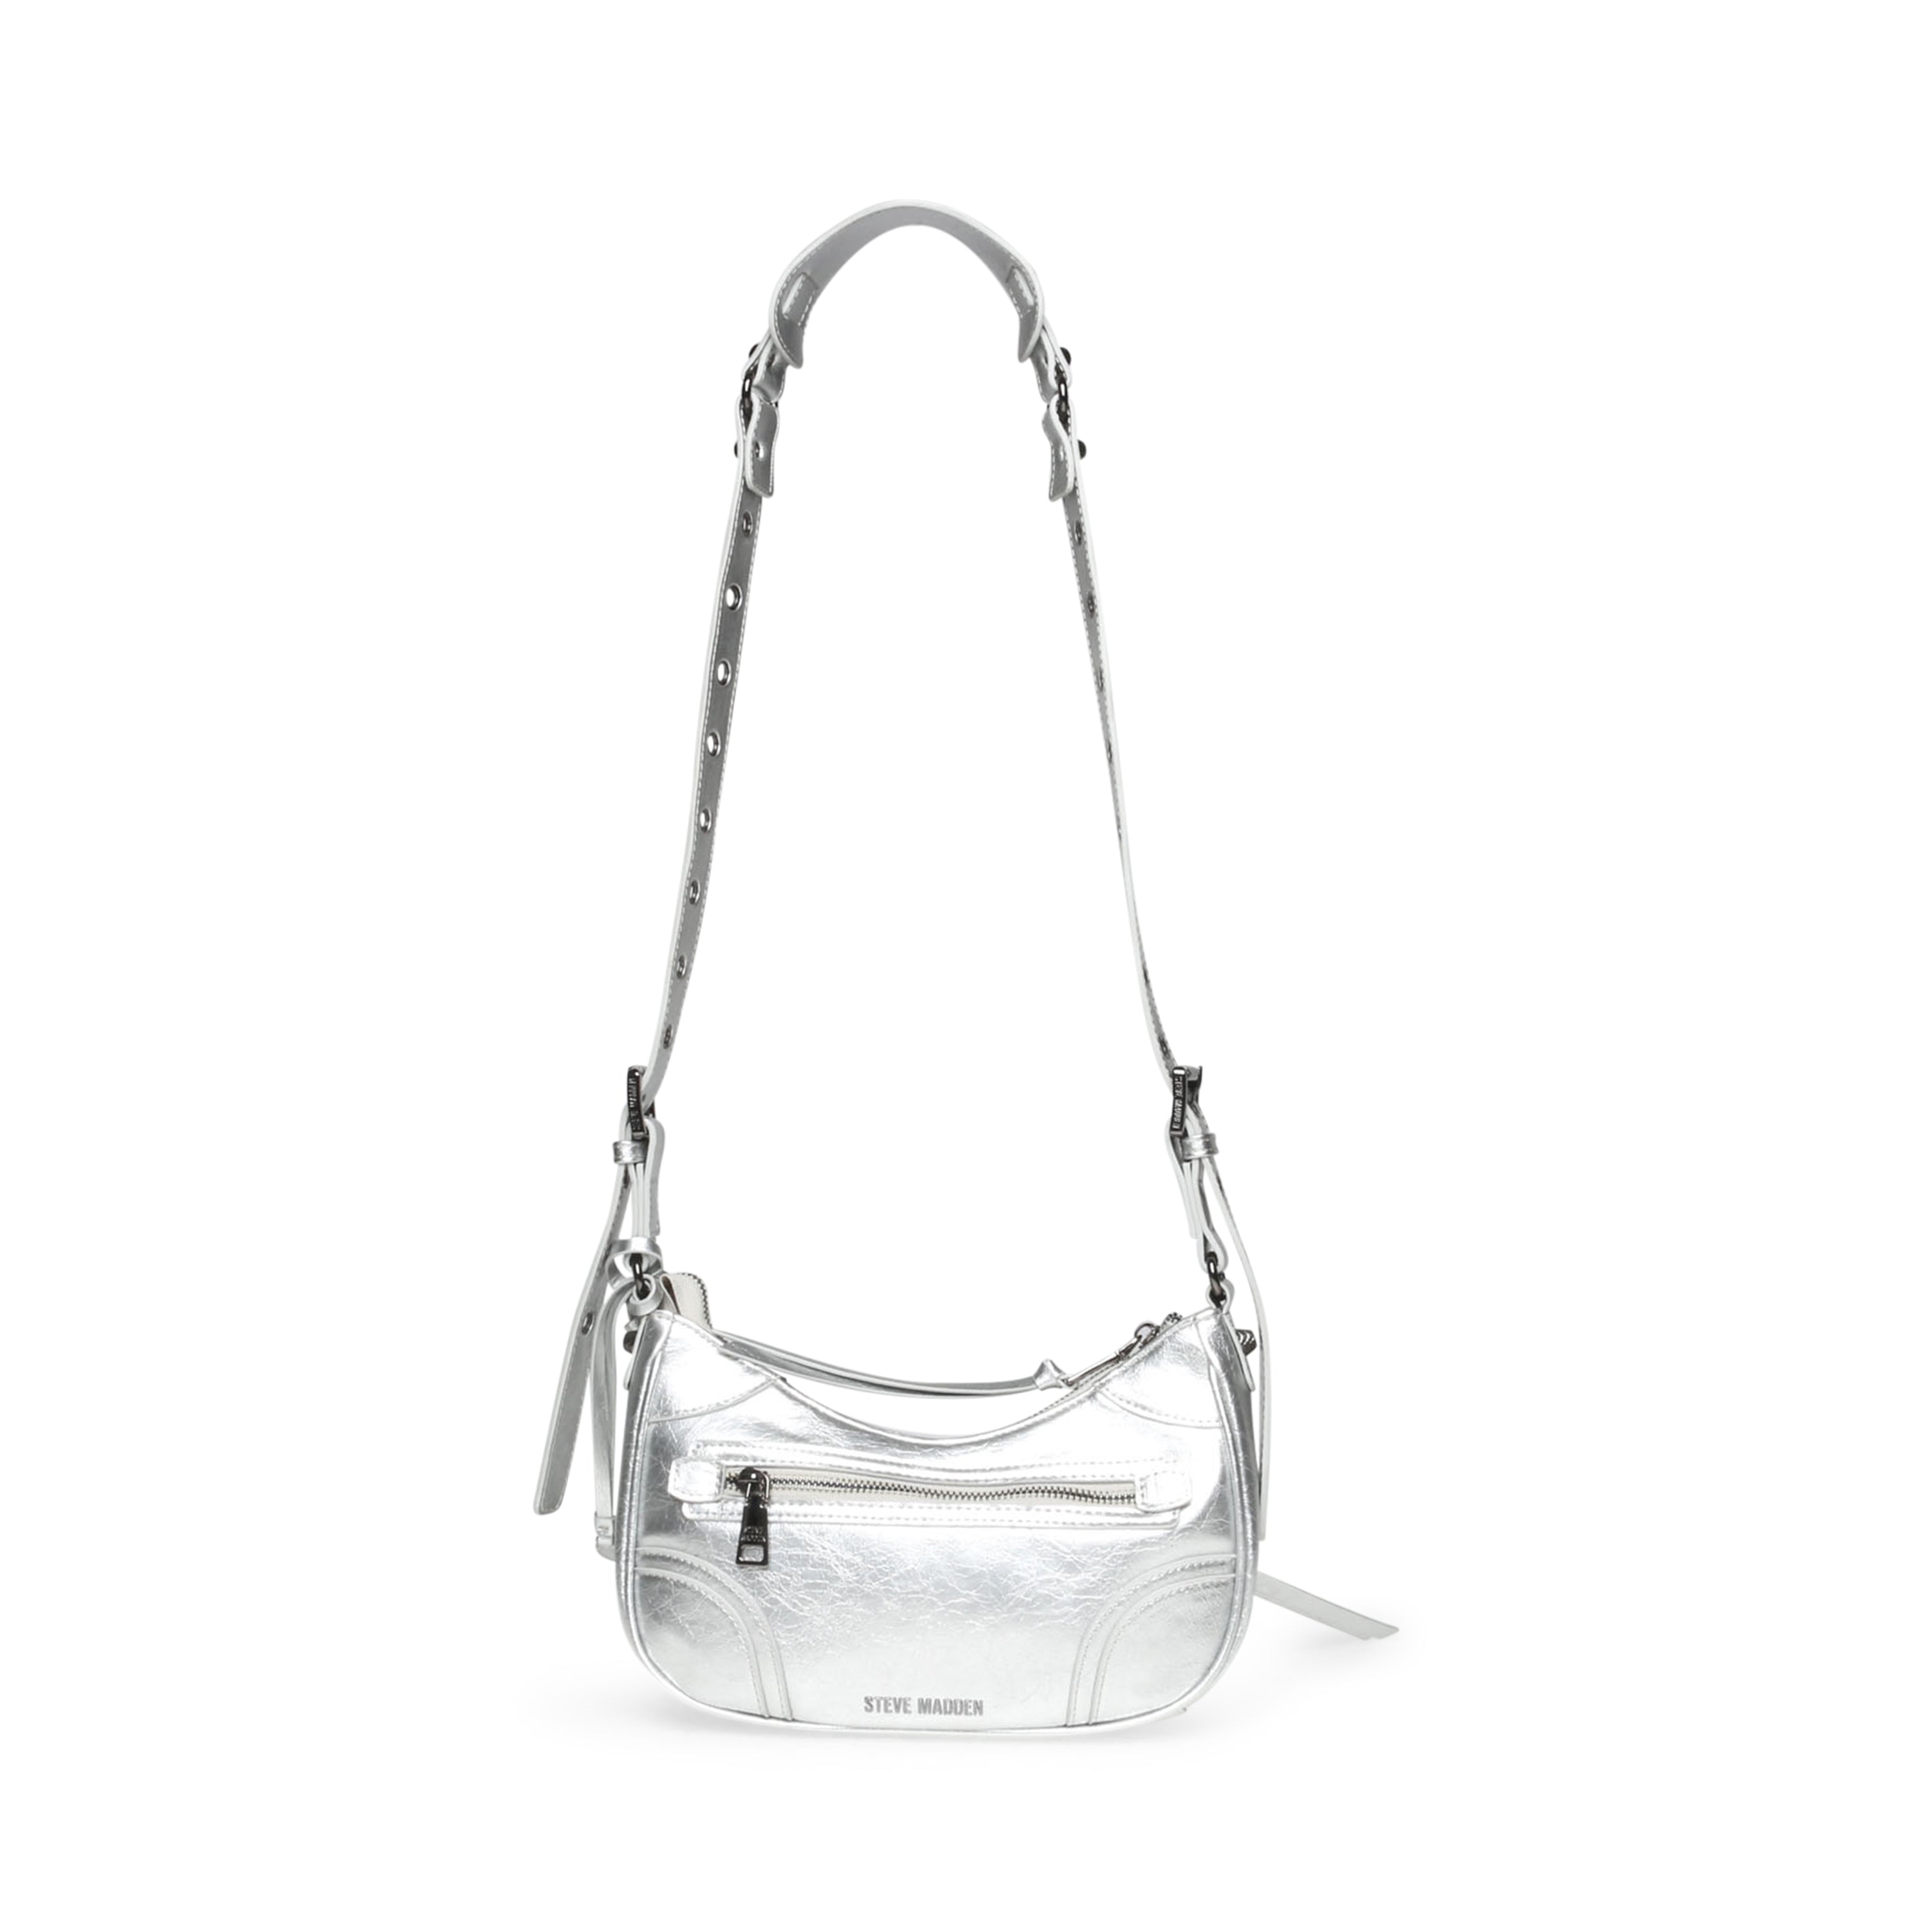 Bglowing Crossbody Bag Silver- Hover Image